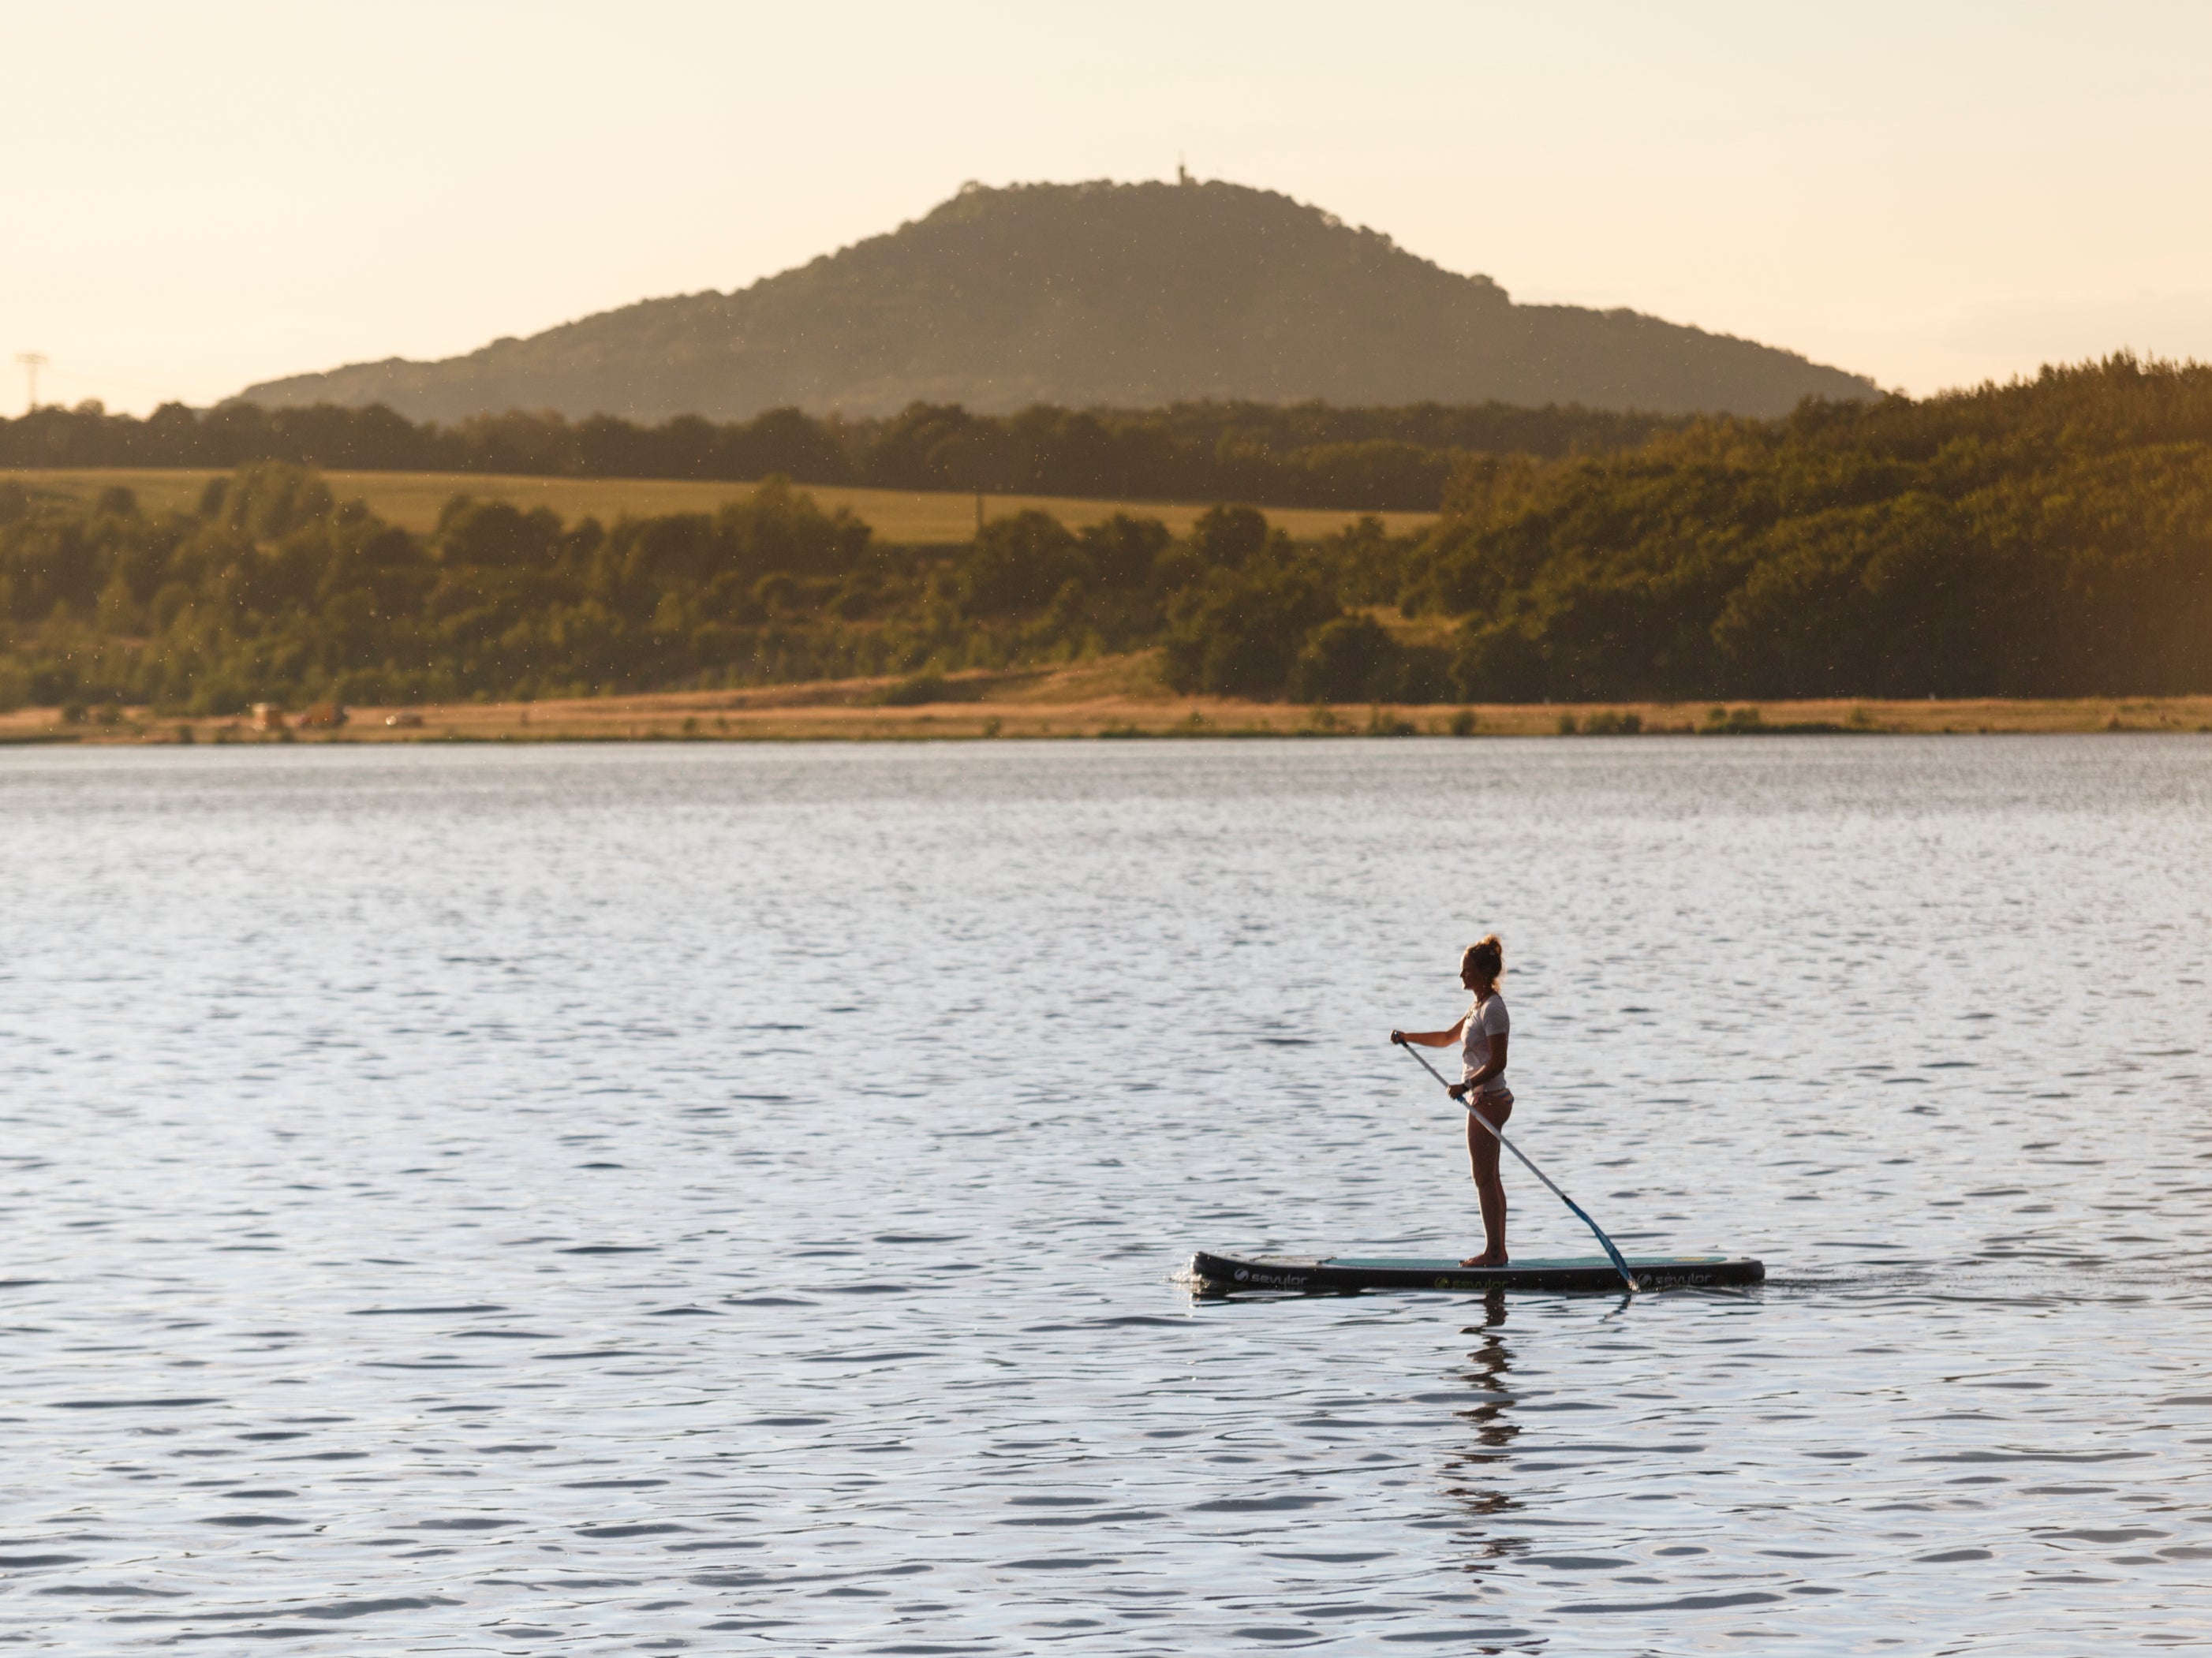 A paddle boarder on the tranquil, man-made Berzdorfer lake